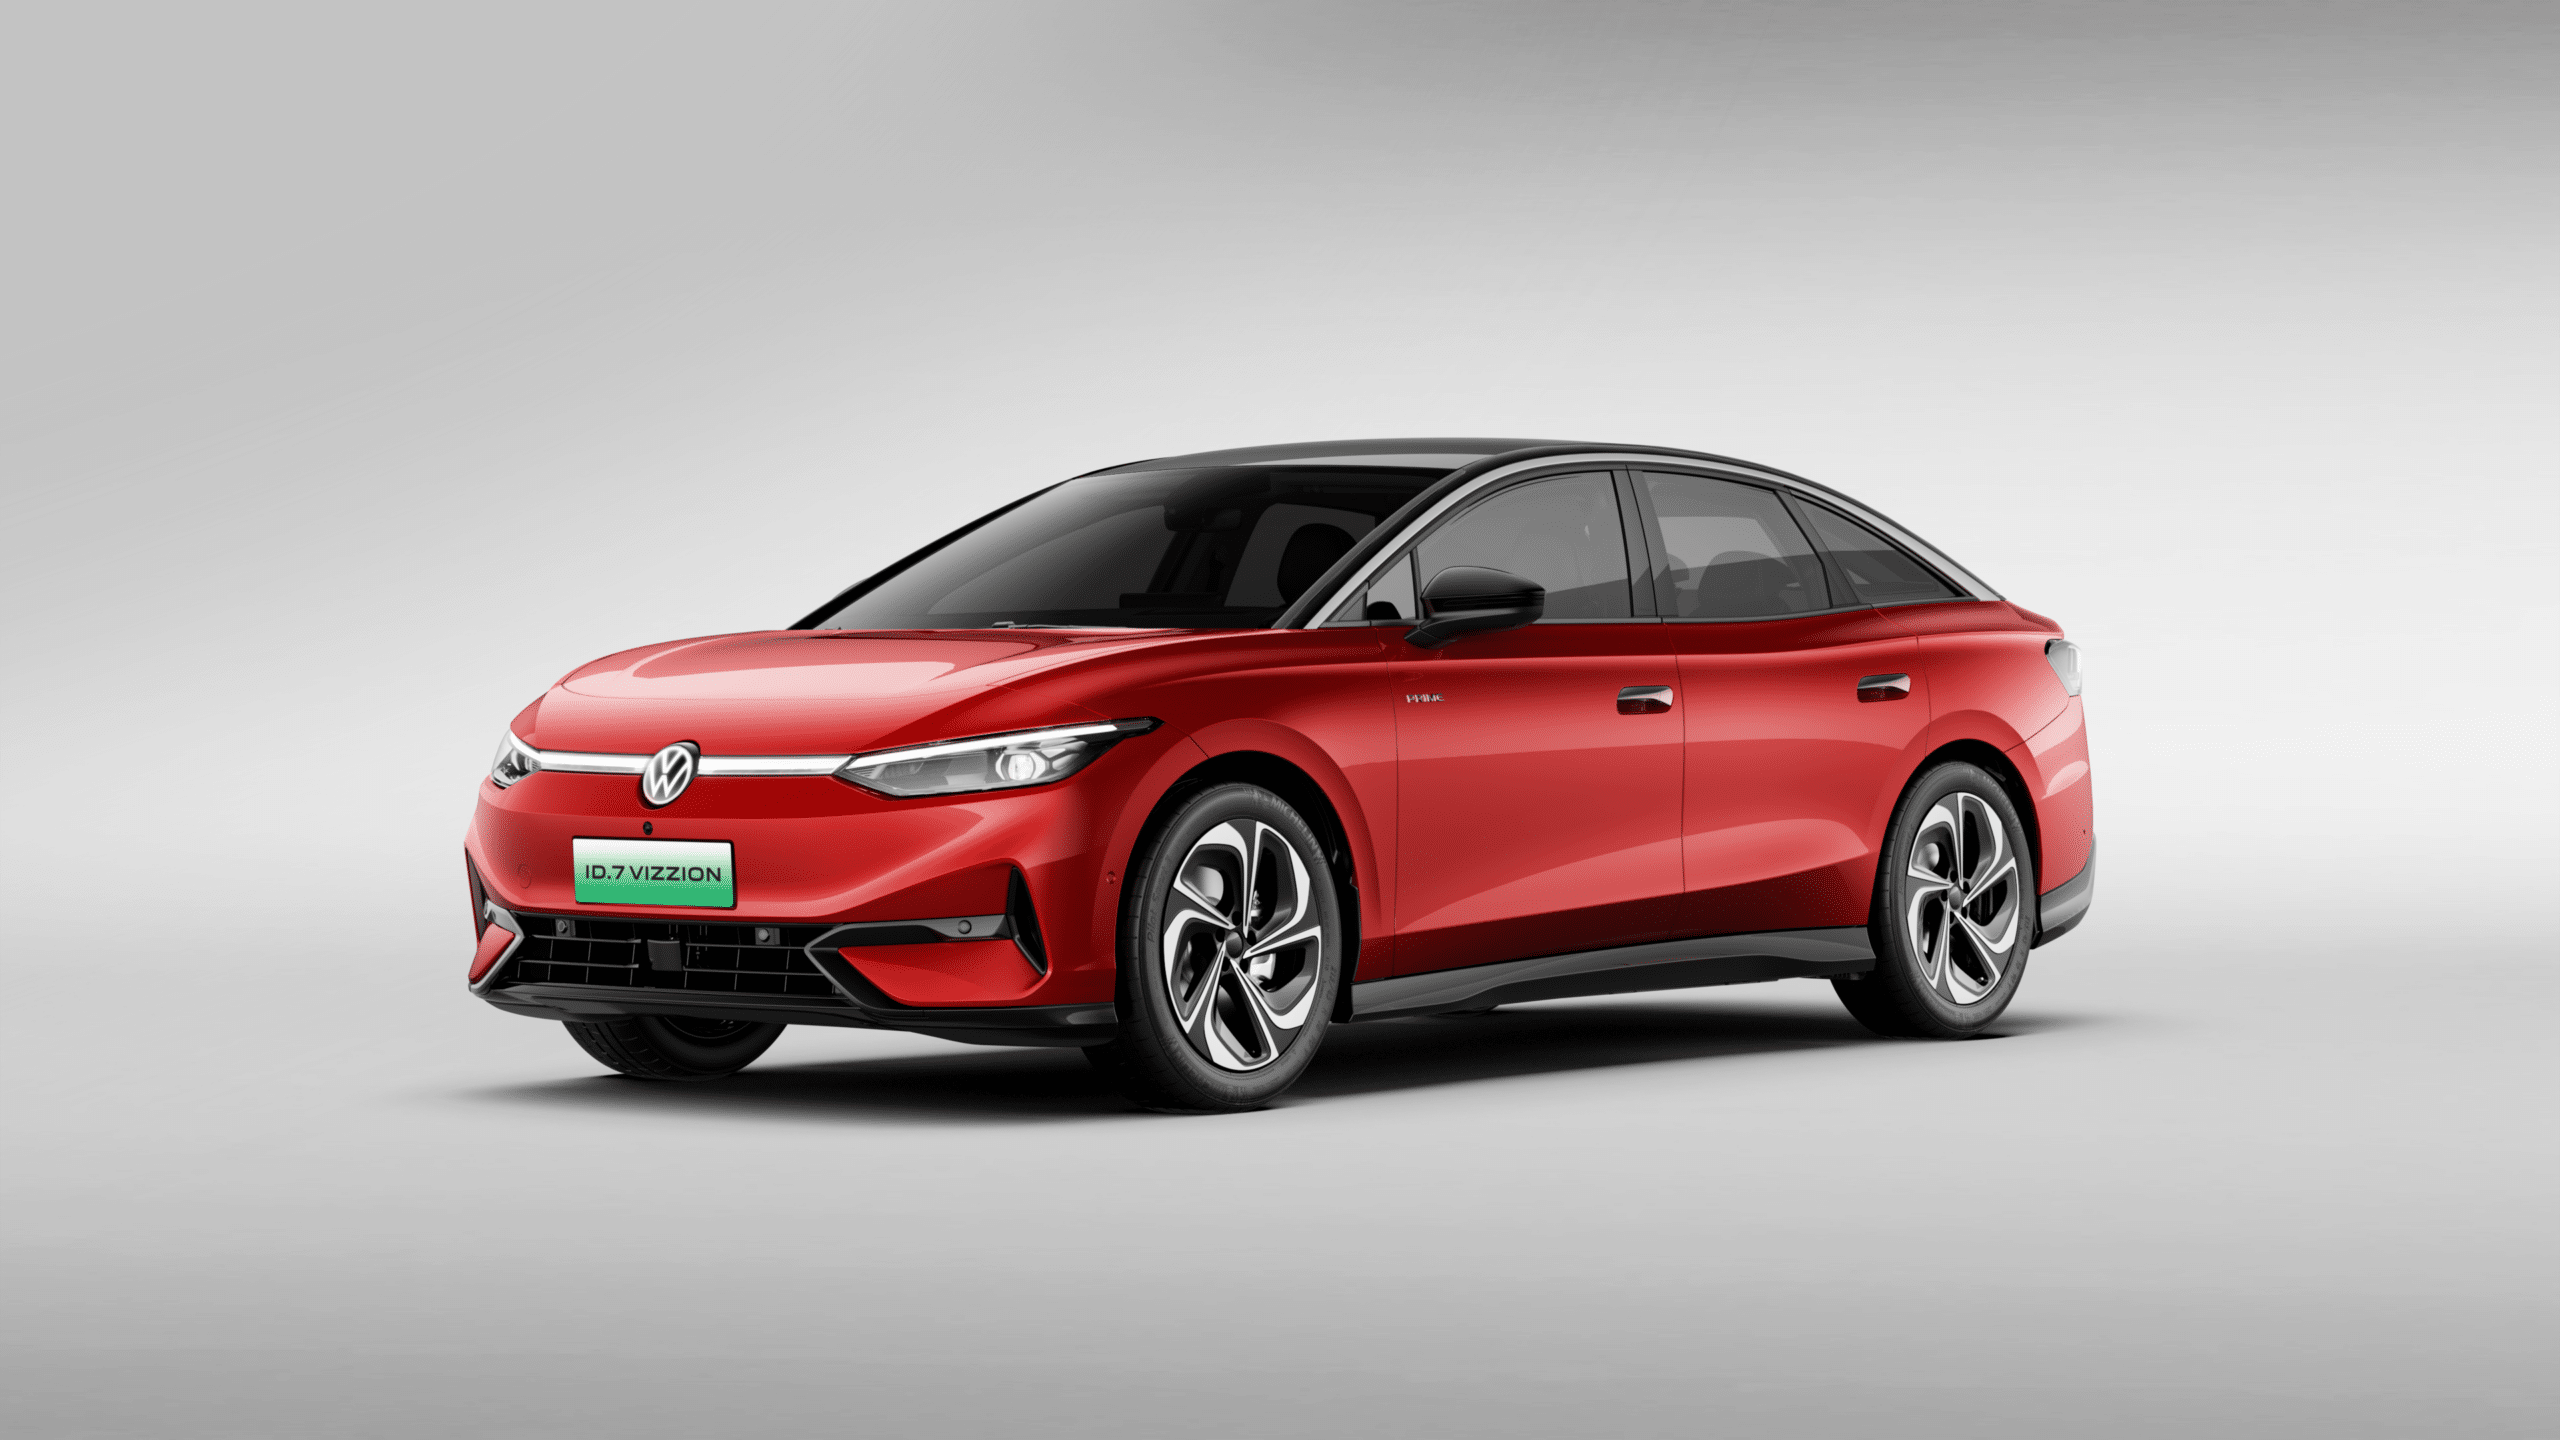 FAW-VW ID.7 VIZZION officially launched in China, starting at 32,000 USD